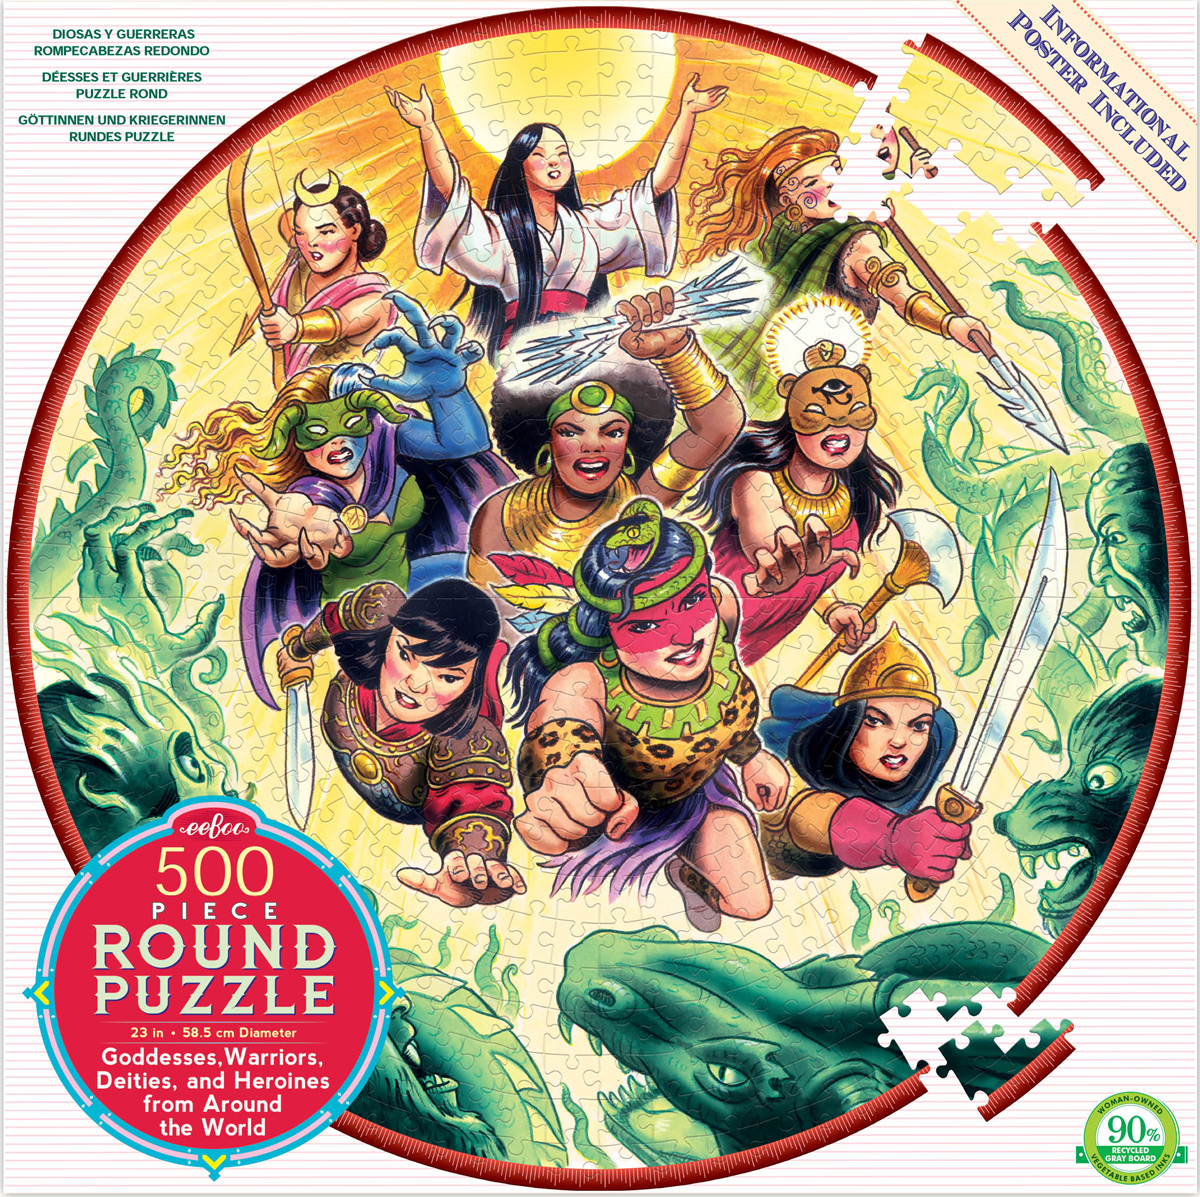 Goddesses and Warriors Fantasy Jigsaw Puzzle